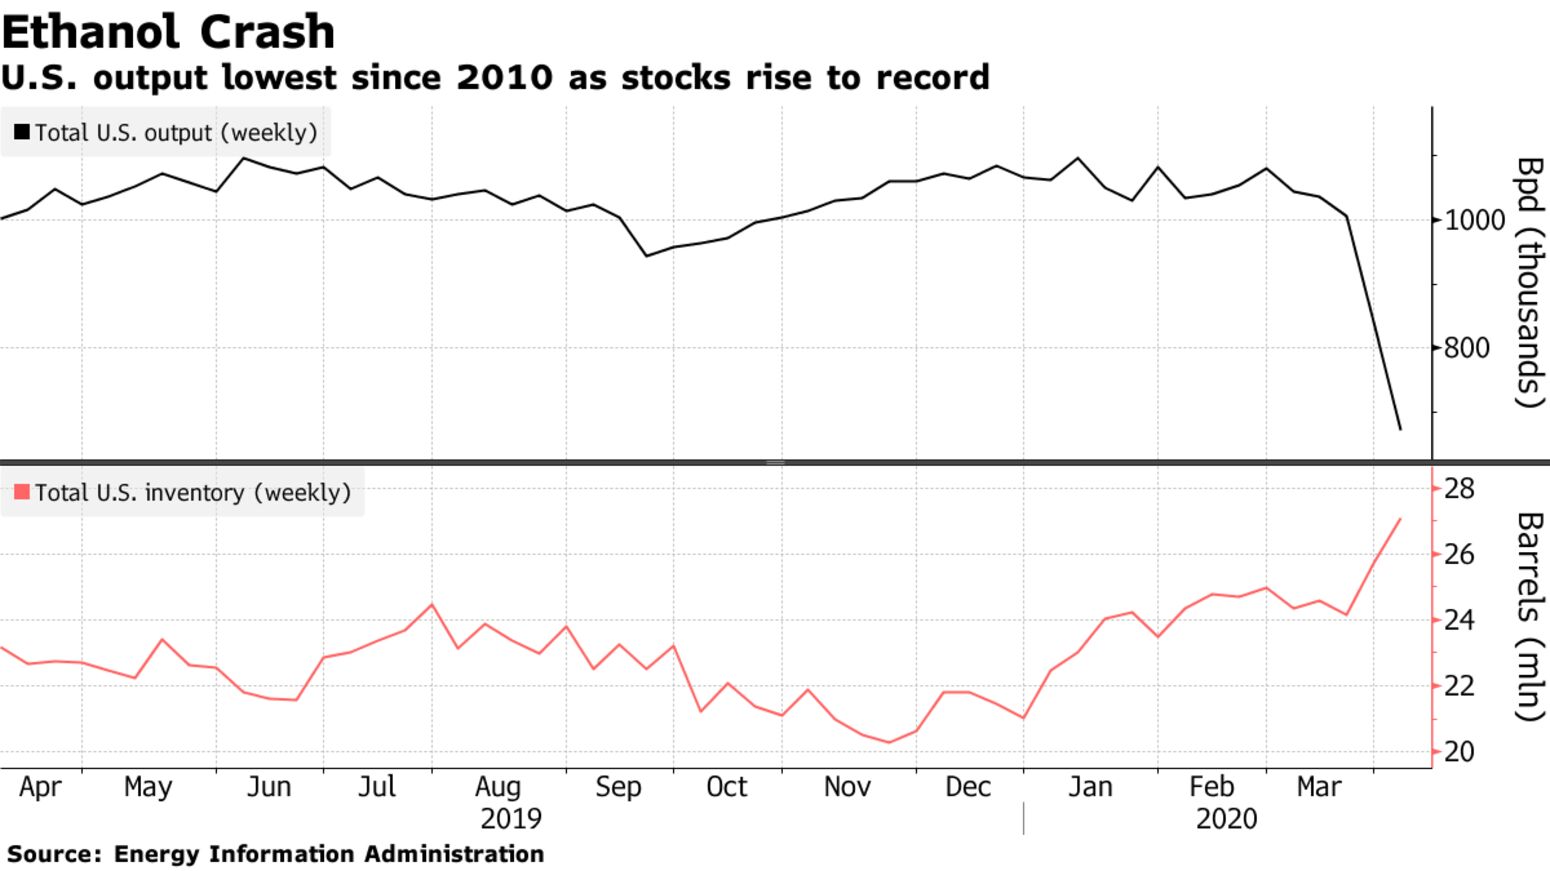 U.S. output lowest since 2010 as stocks rise to record